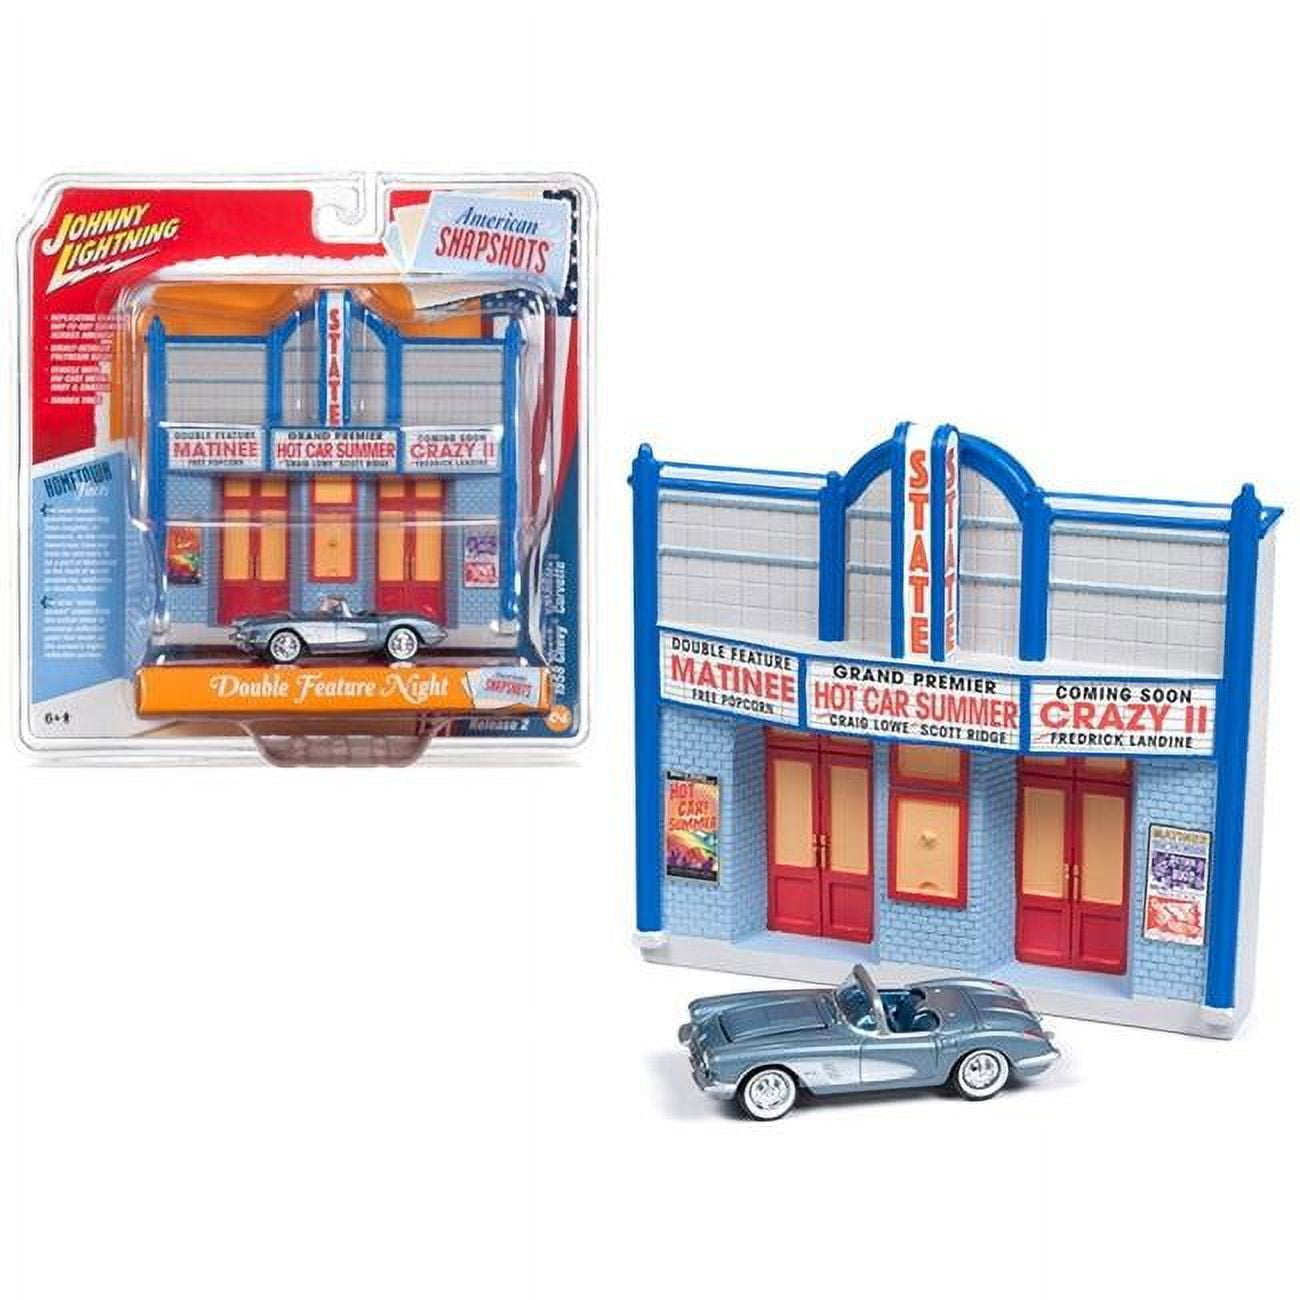 Jldr003-corv 1958 Chevrolet Corvette Convertible Blue & Resin Movie Theater For Facade Double Night 1 By 64 Die-cast Models